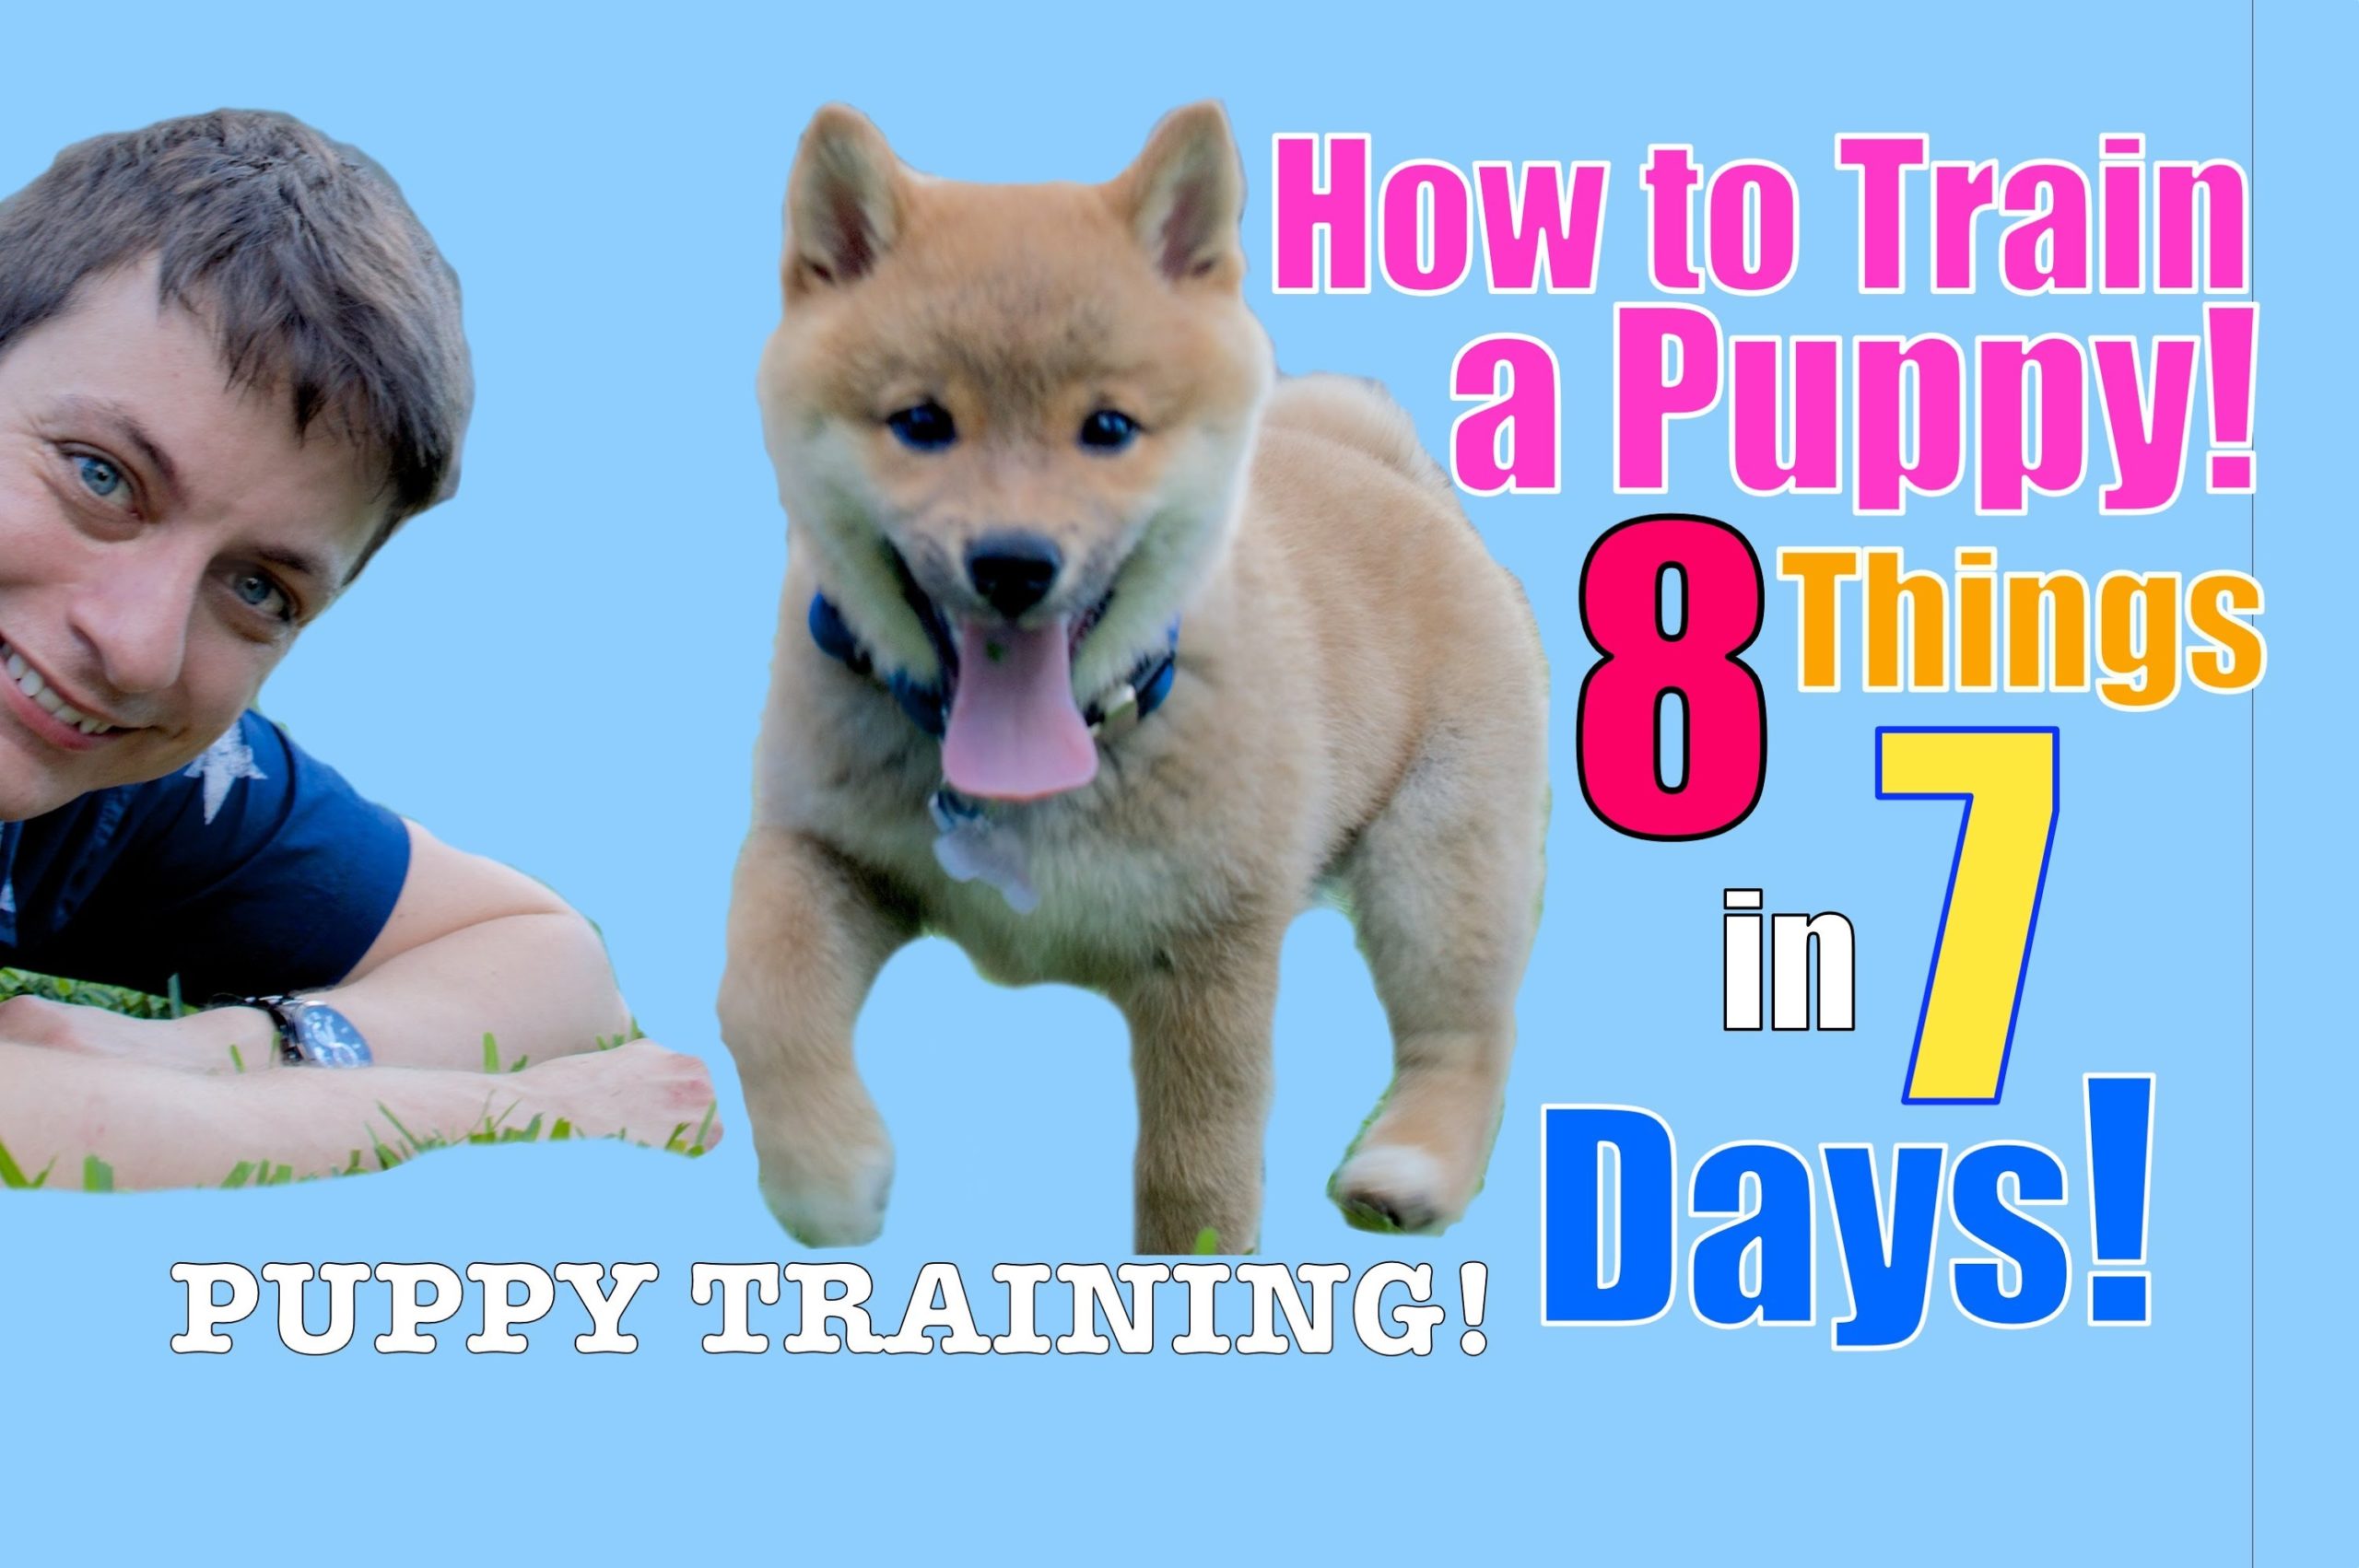 Shiba Inu Puppy Training (STOP Puppy Biting, Come, Stay… )